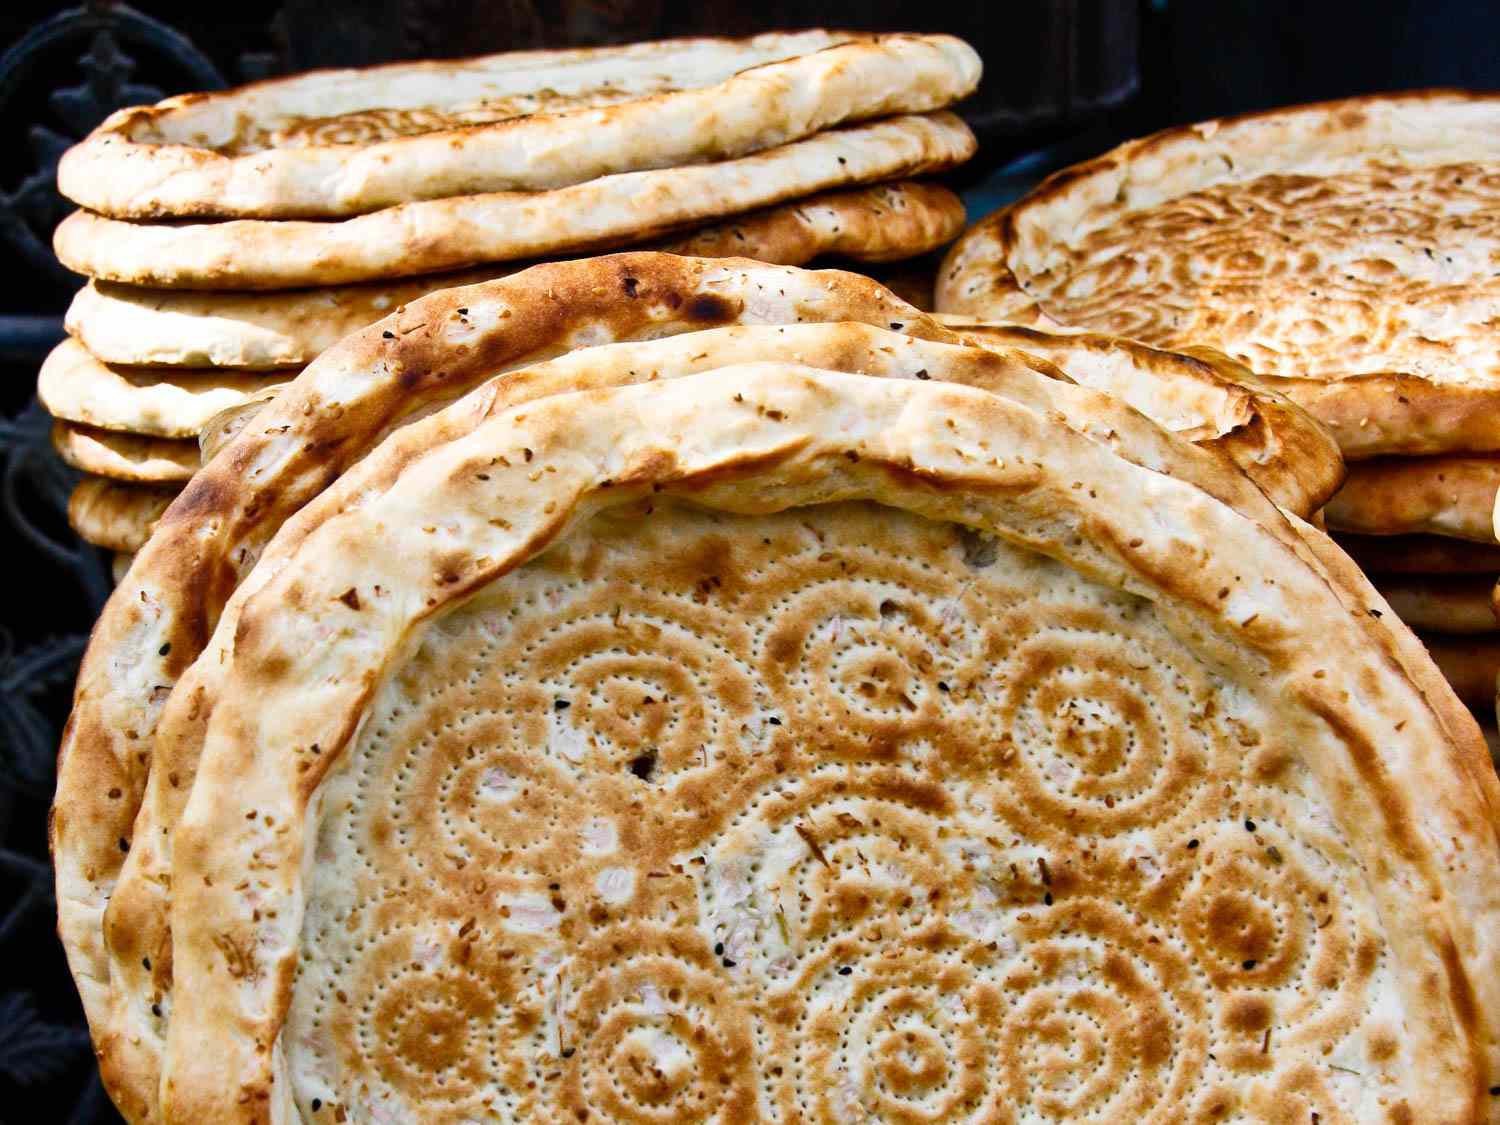 Nang / Bread is one of the best Chinese muslim foods